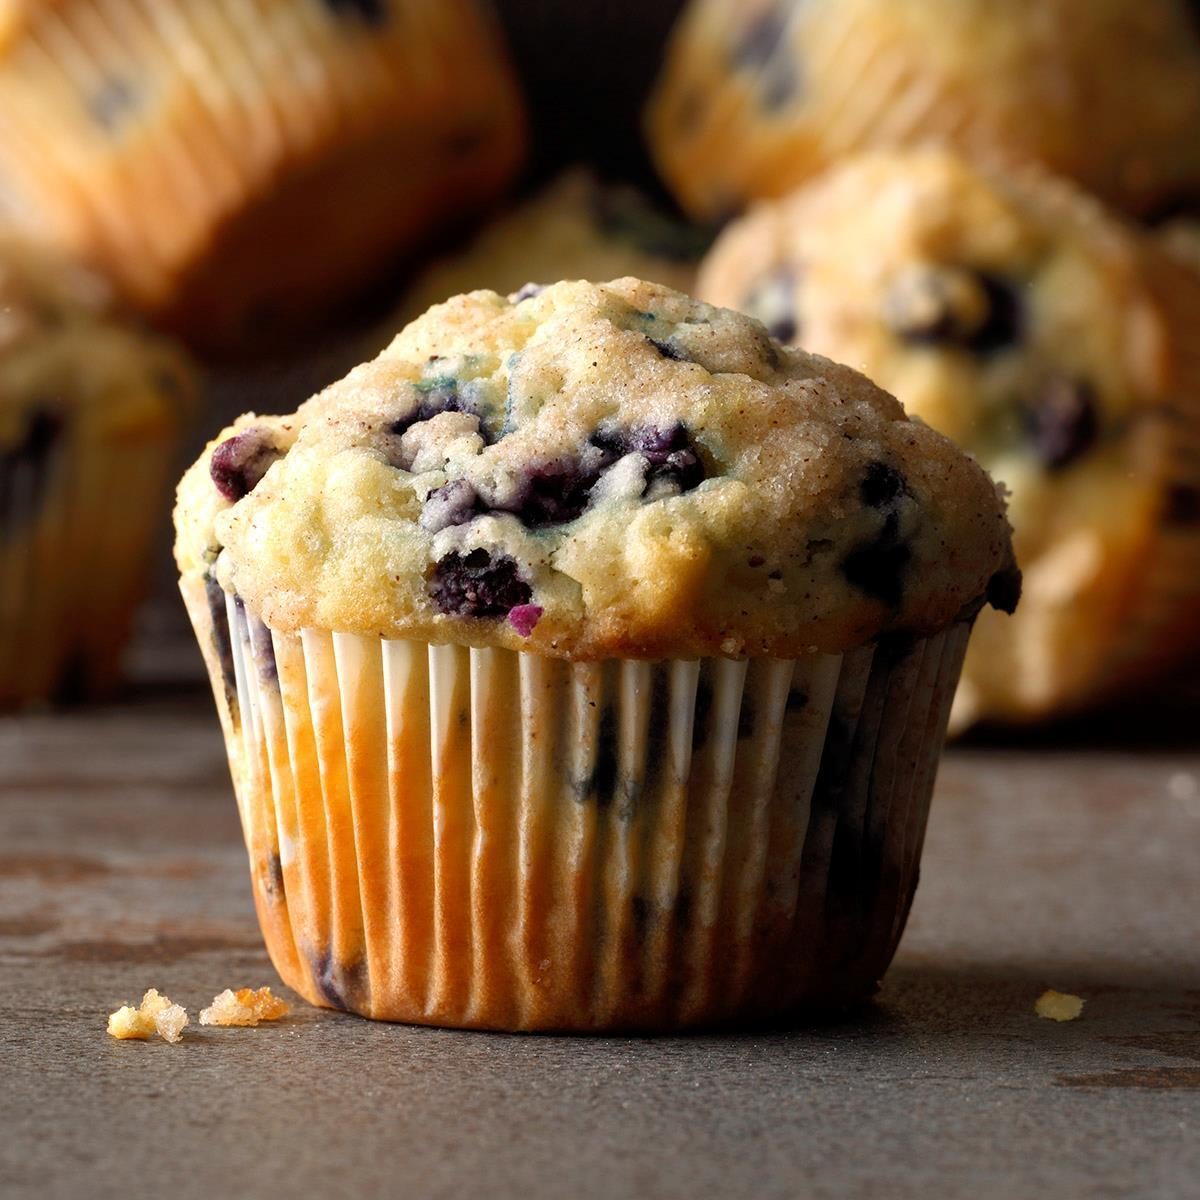 Wild Blueberry Muffins Recipe: How to Make It